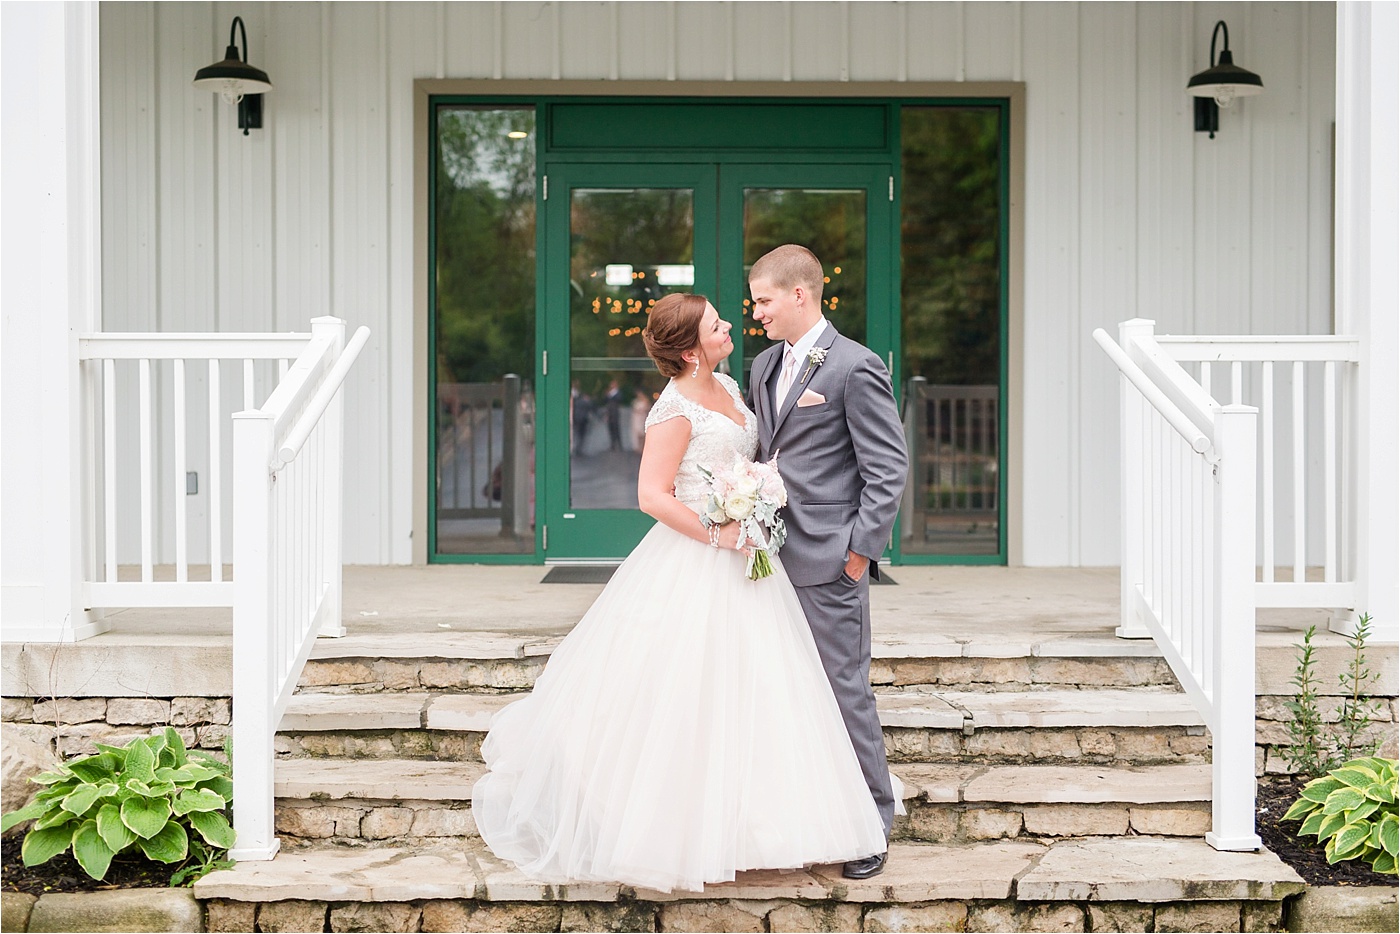 A Blush Outdoor wedding at Irongate Equestrian | KariMe Photography_0106